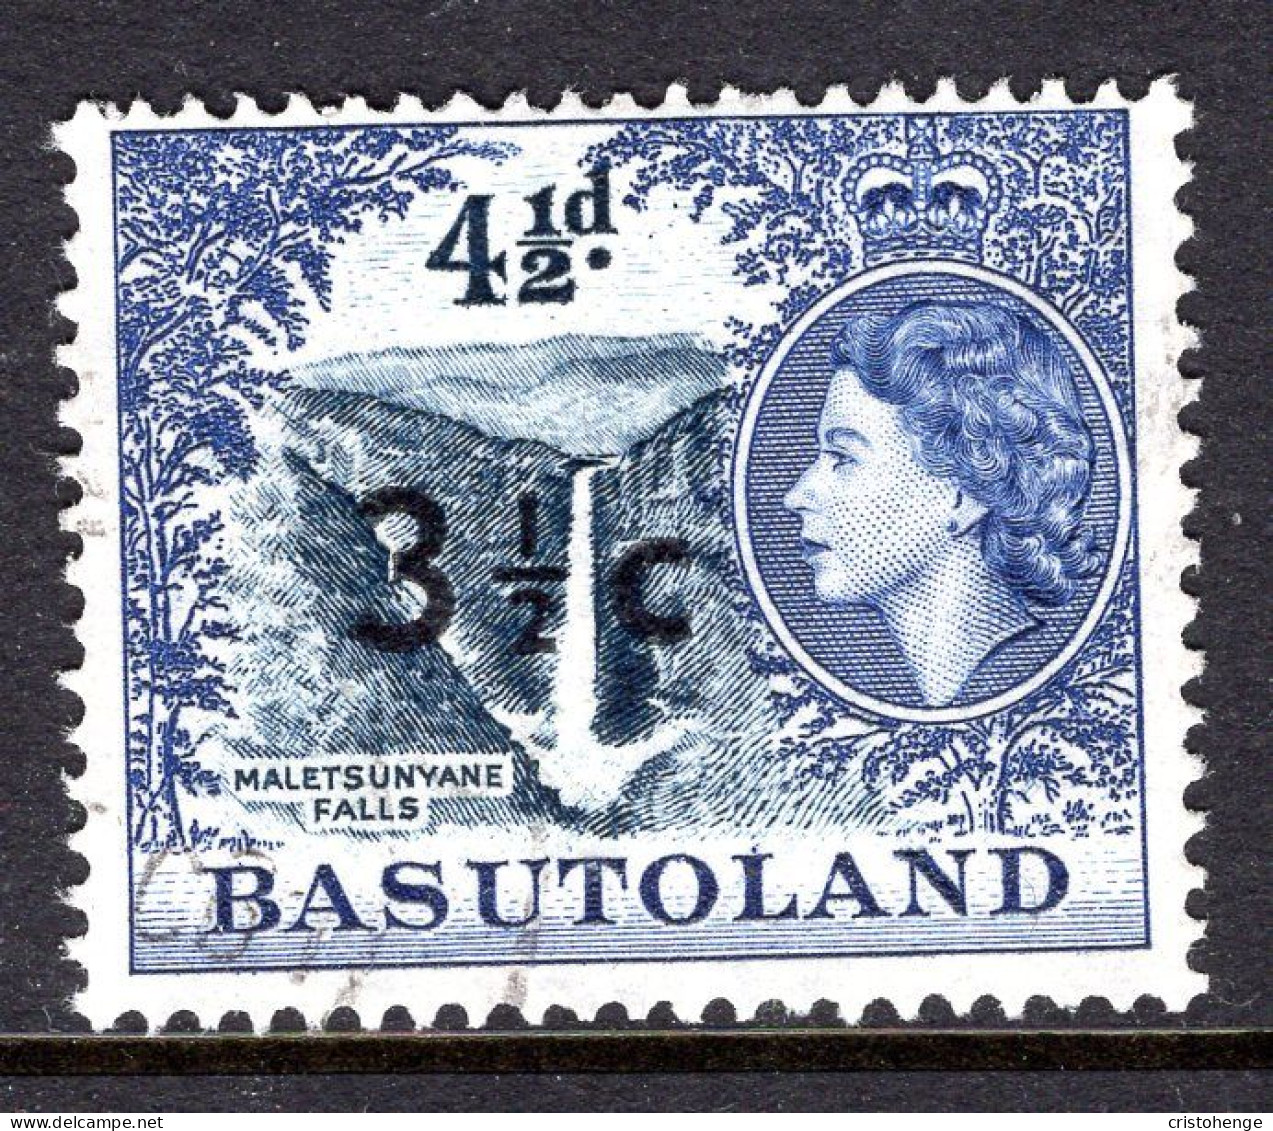 Basutoland 1961 Decimal Surcharges - 3½c On 4½d Maletsunyane Falls - Type I - Used (SG 62) - 1933-1964 Crown Colony